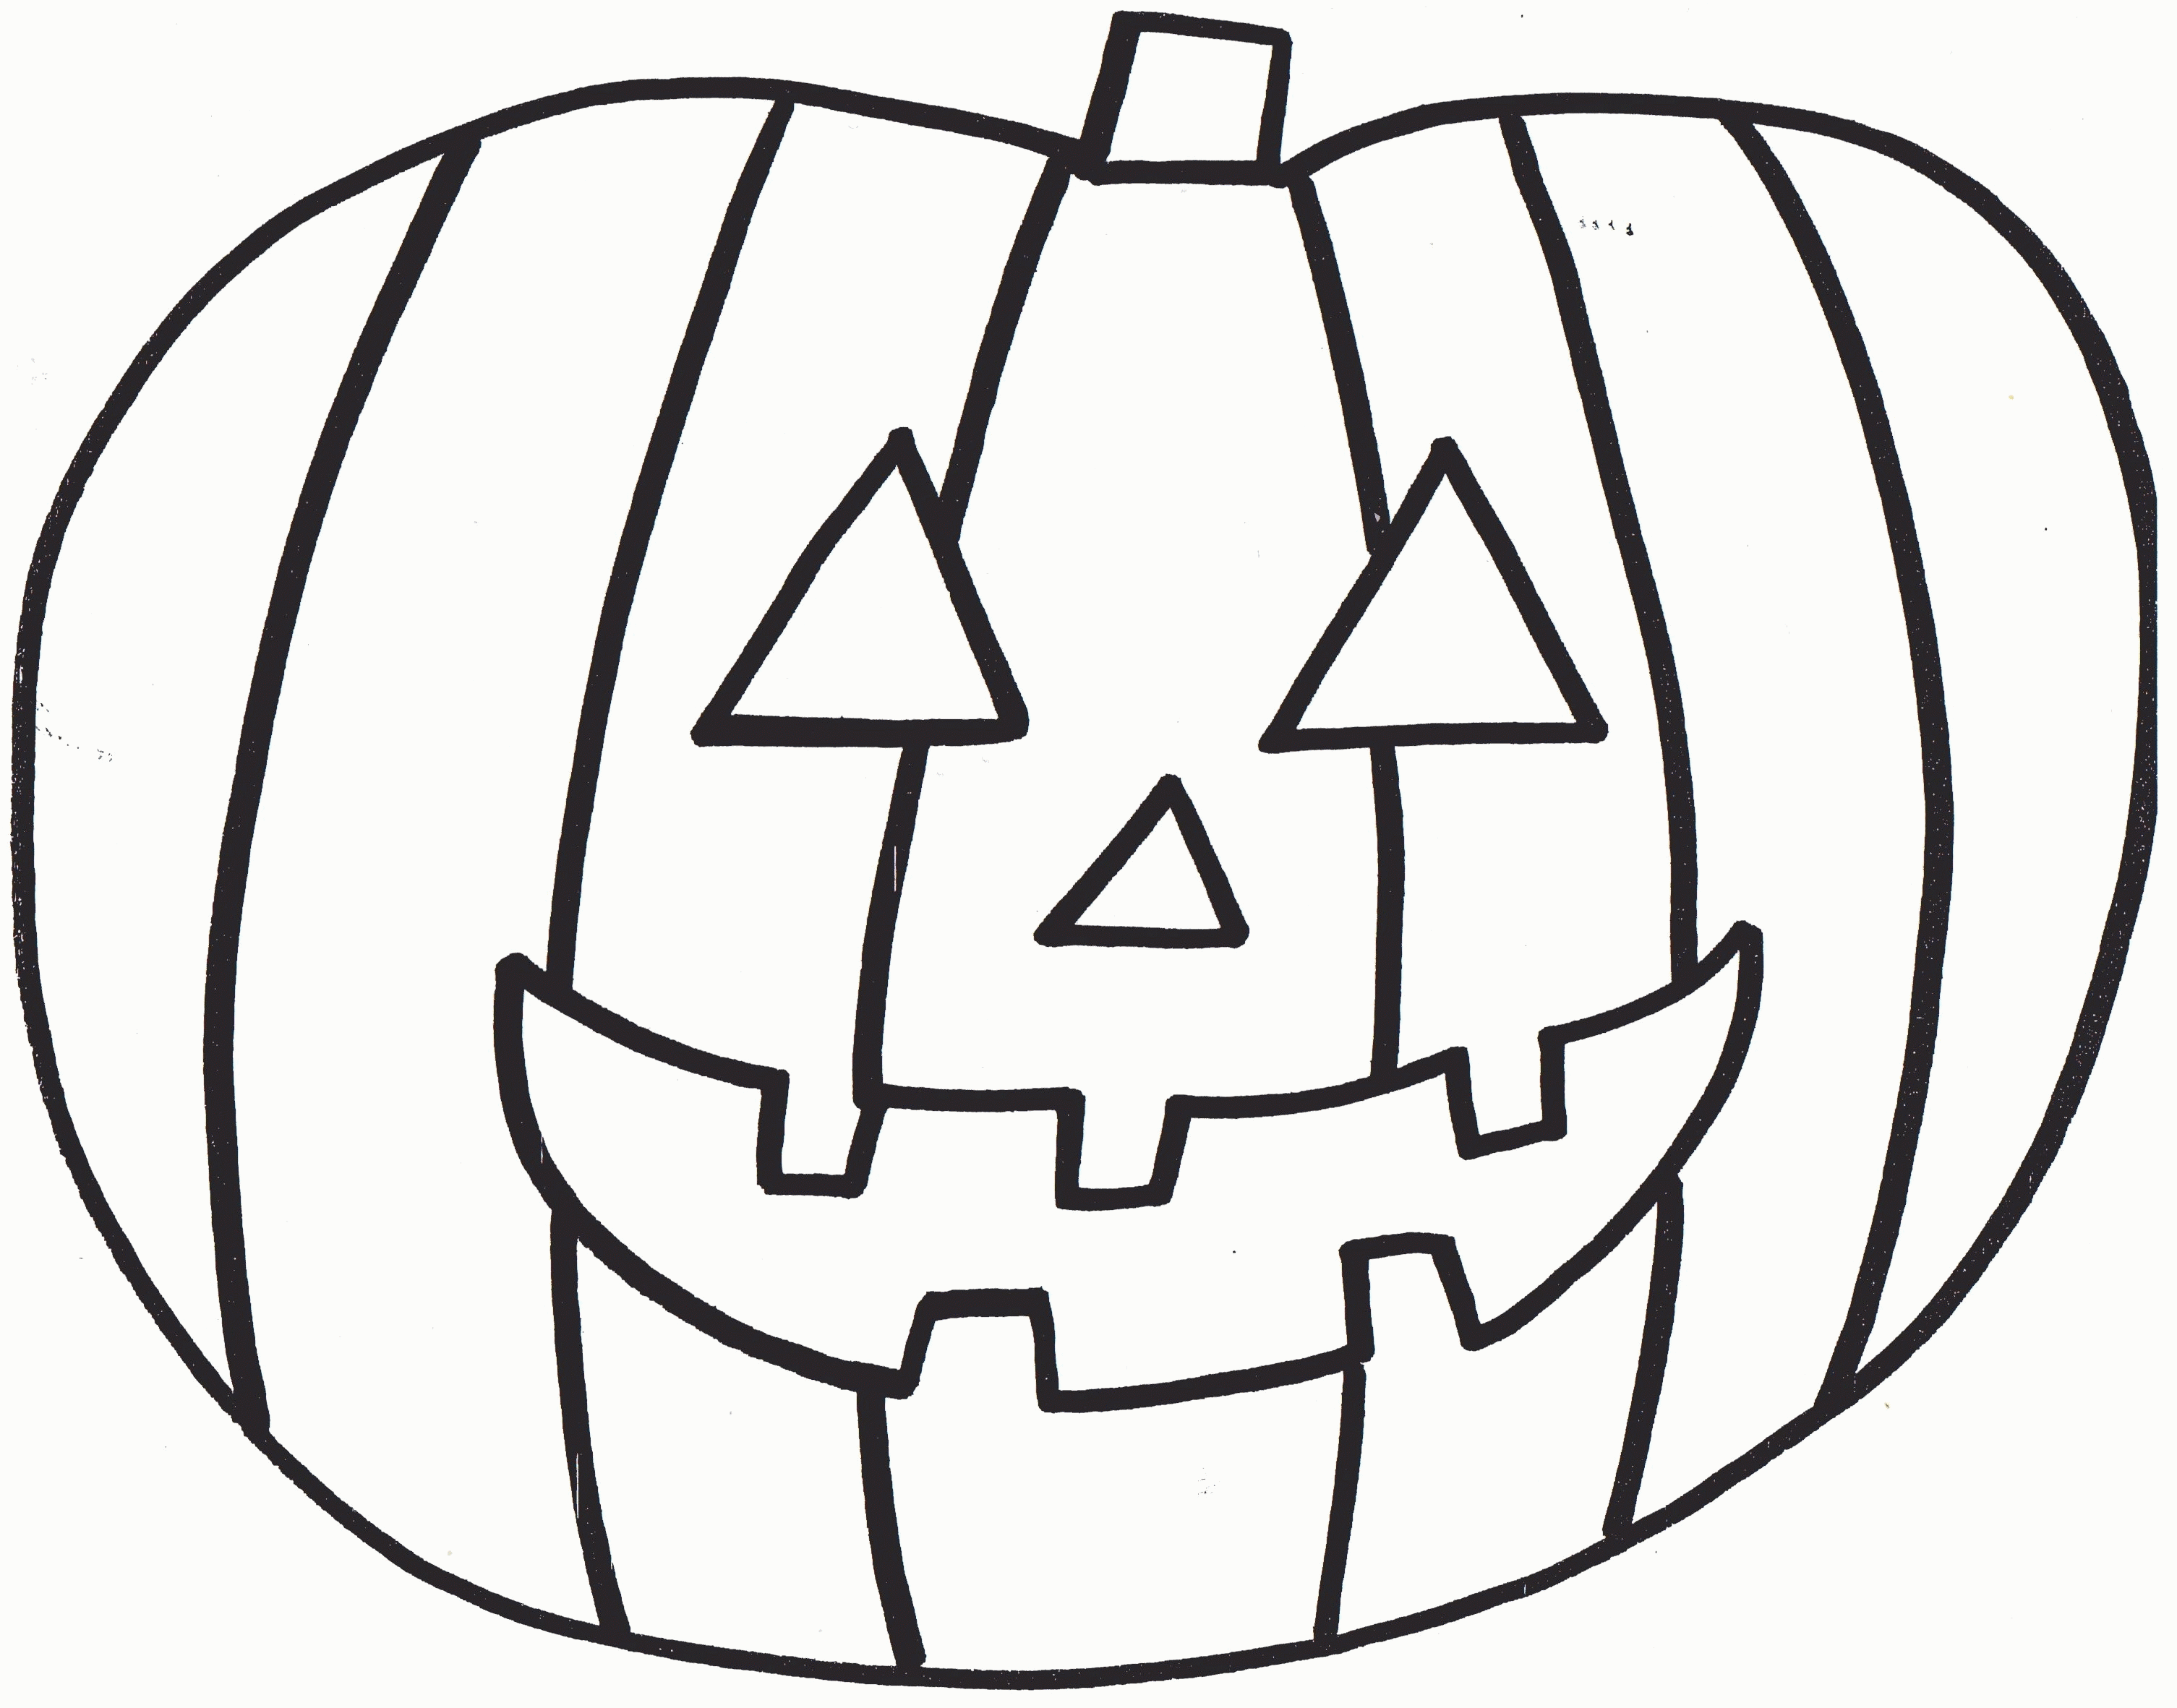 Smile Pumpkin Coloring Pages Coloring Pages For Kids #Xi ...